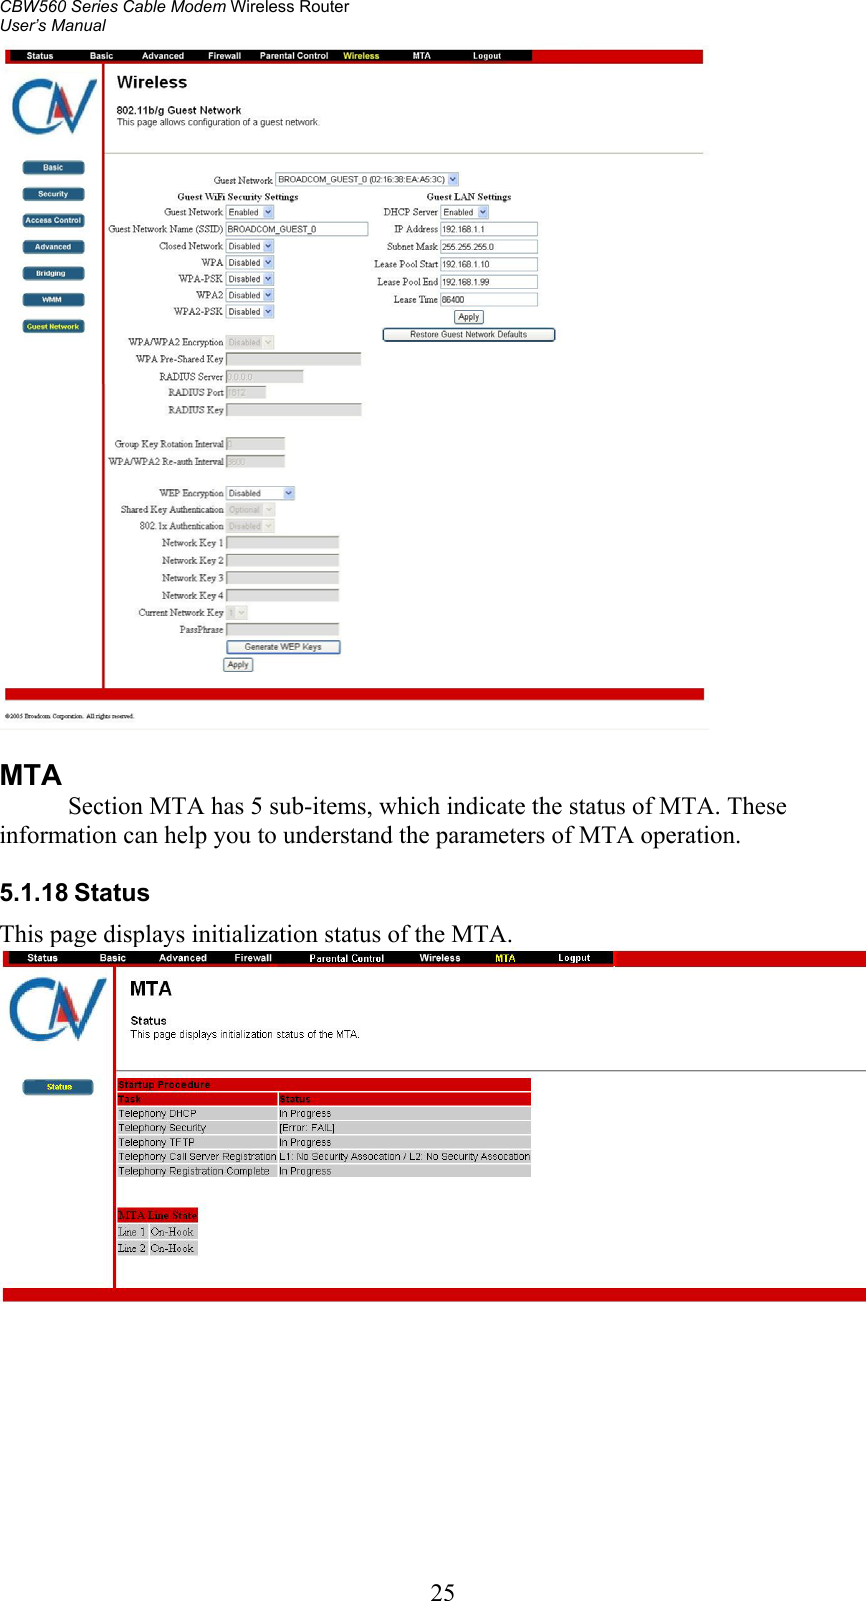 CBW560 Series Cable Modem Wireless Router User’s Manual   25  MTA            Section MTA has 5 sub-items, which indicate the status of MTA. These information can help you to understand the parameters of MTA operation.  5.1.18 Status This page displays initialization status of the MTA.   